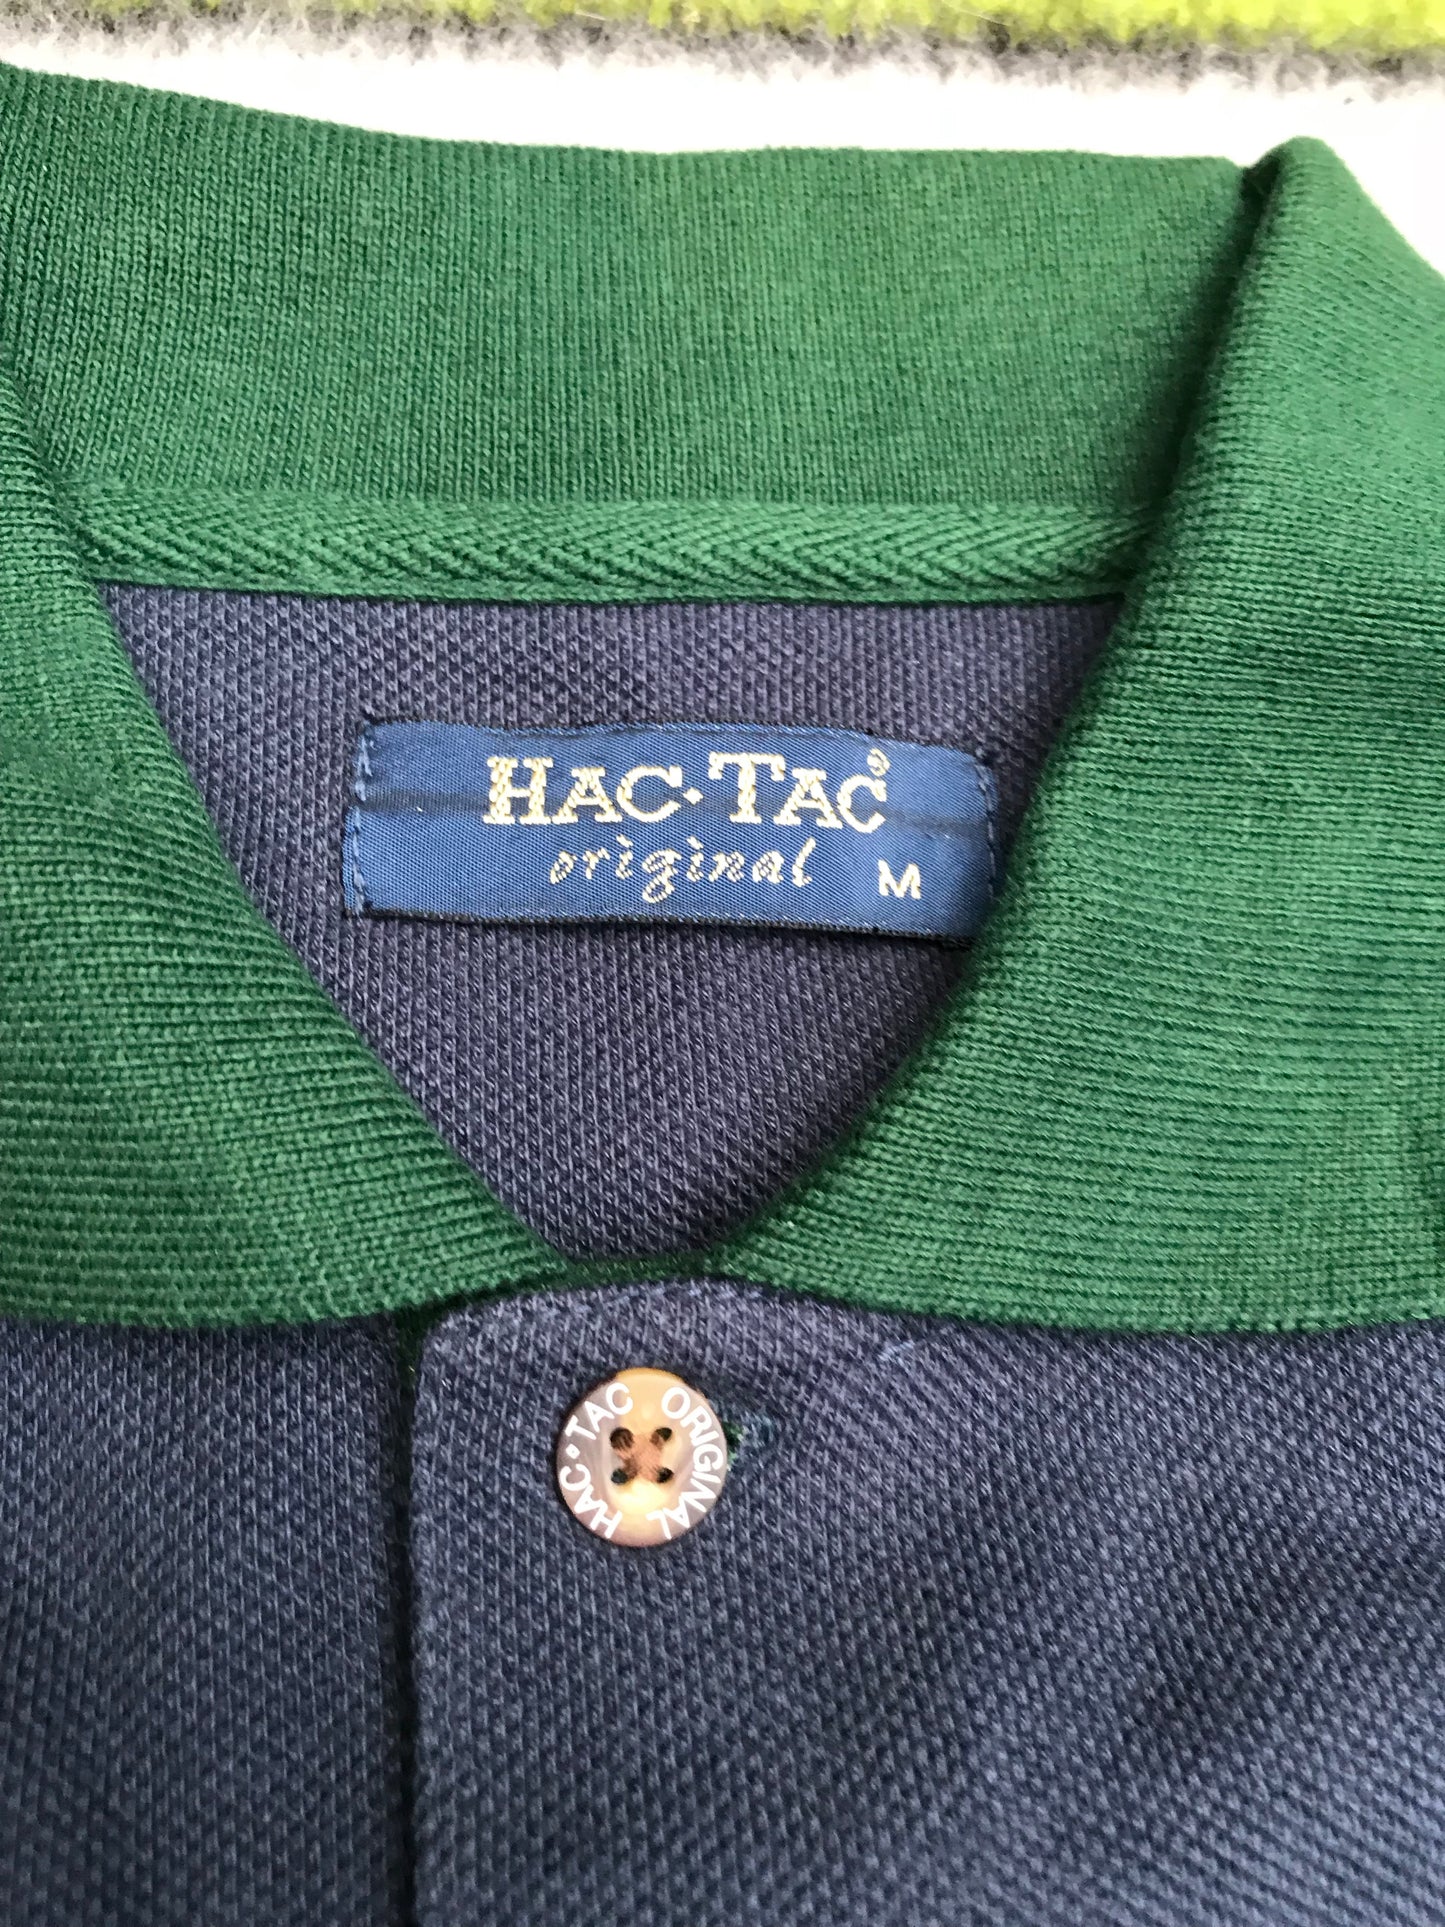 Hav-Tac polo t-shirt green and navy blue size M (12) FREE POSTAGE